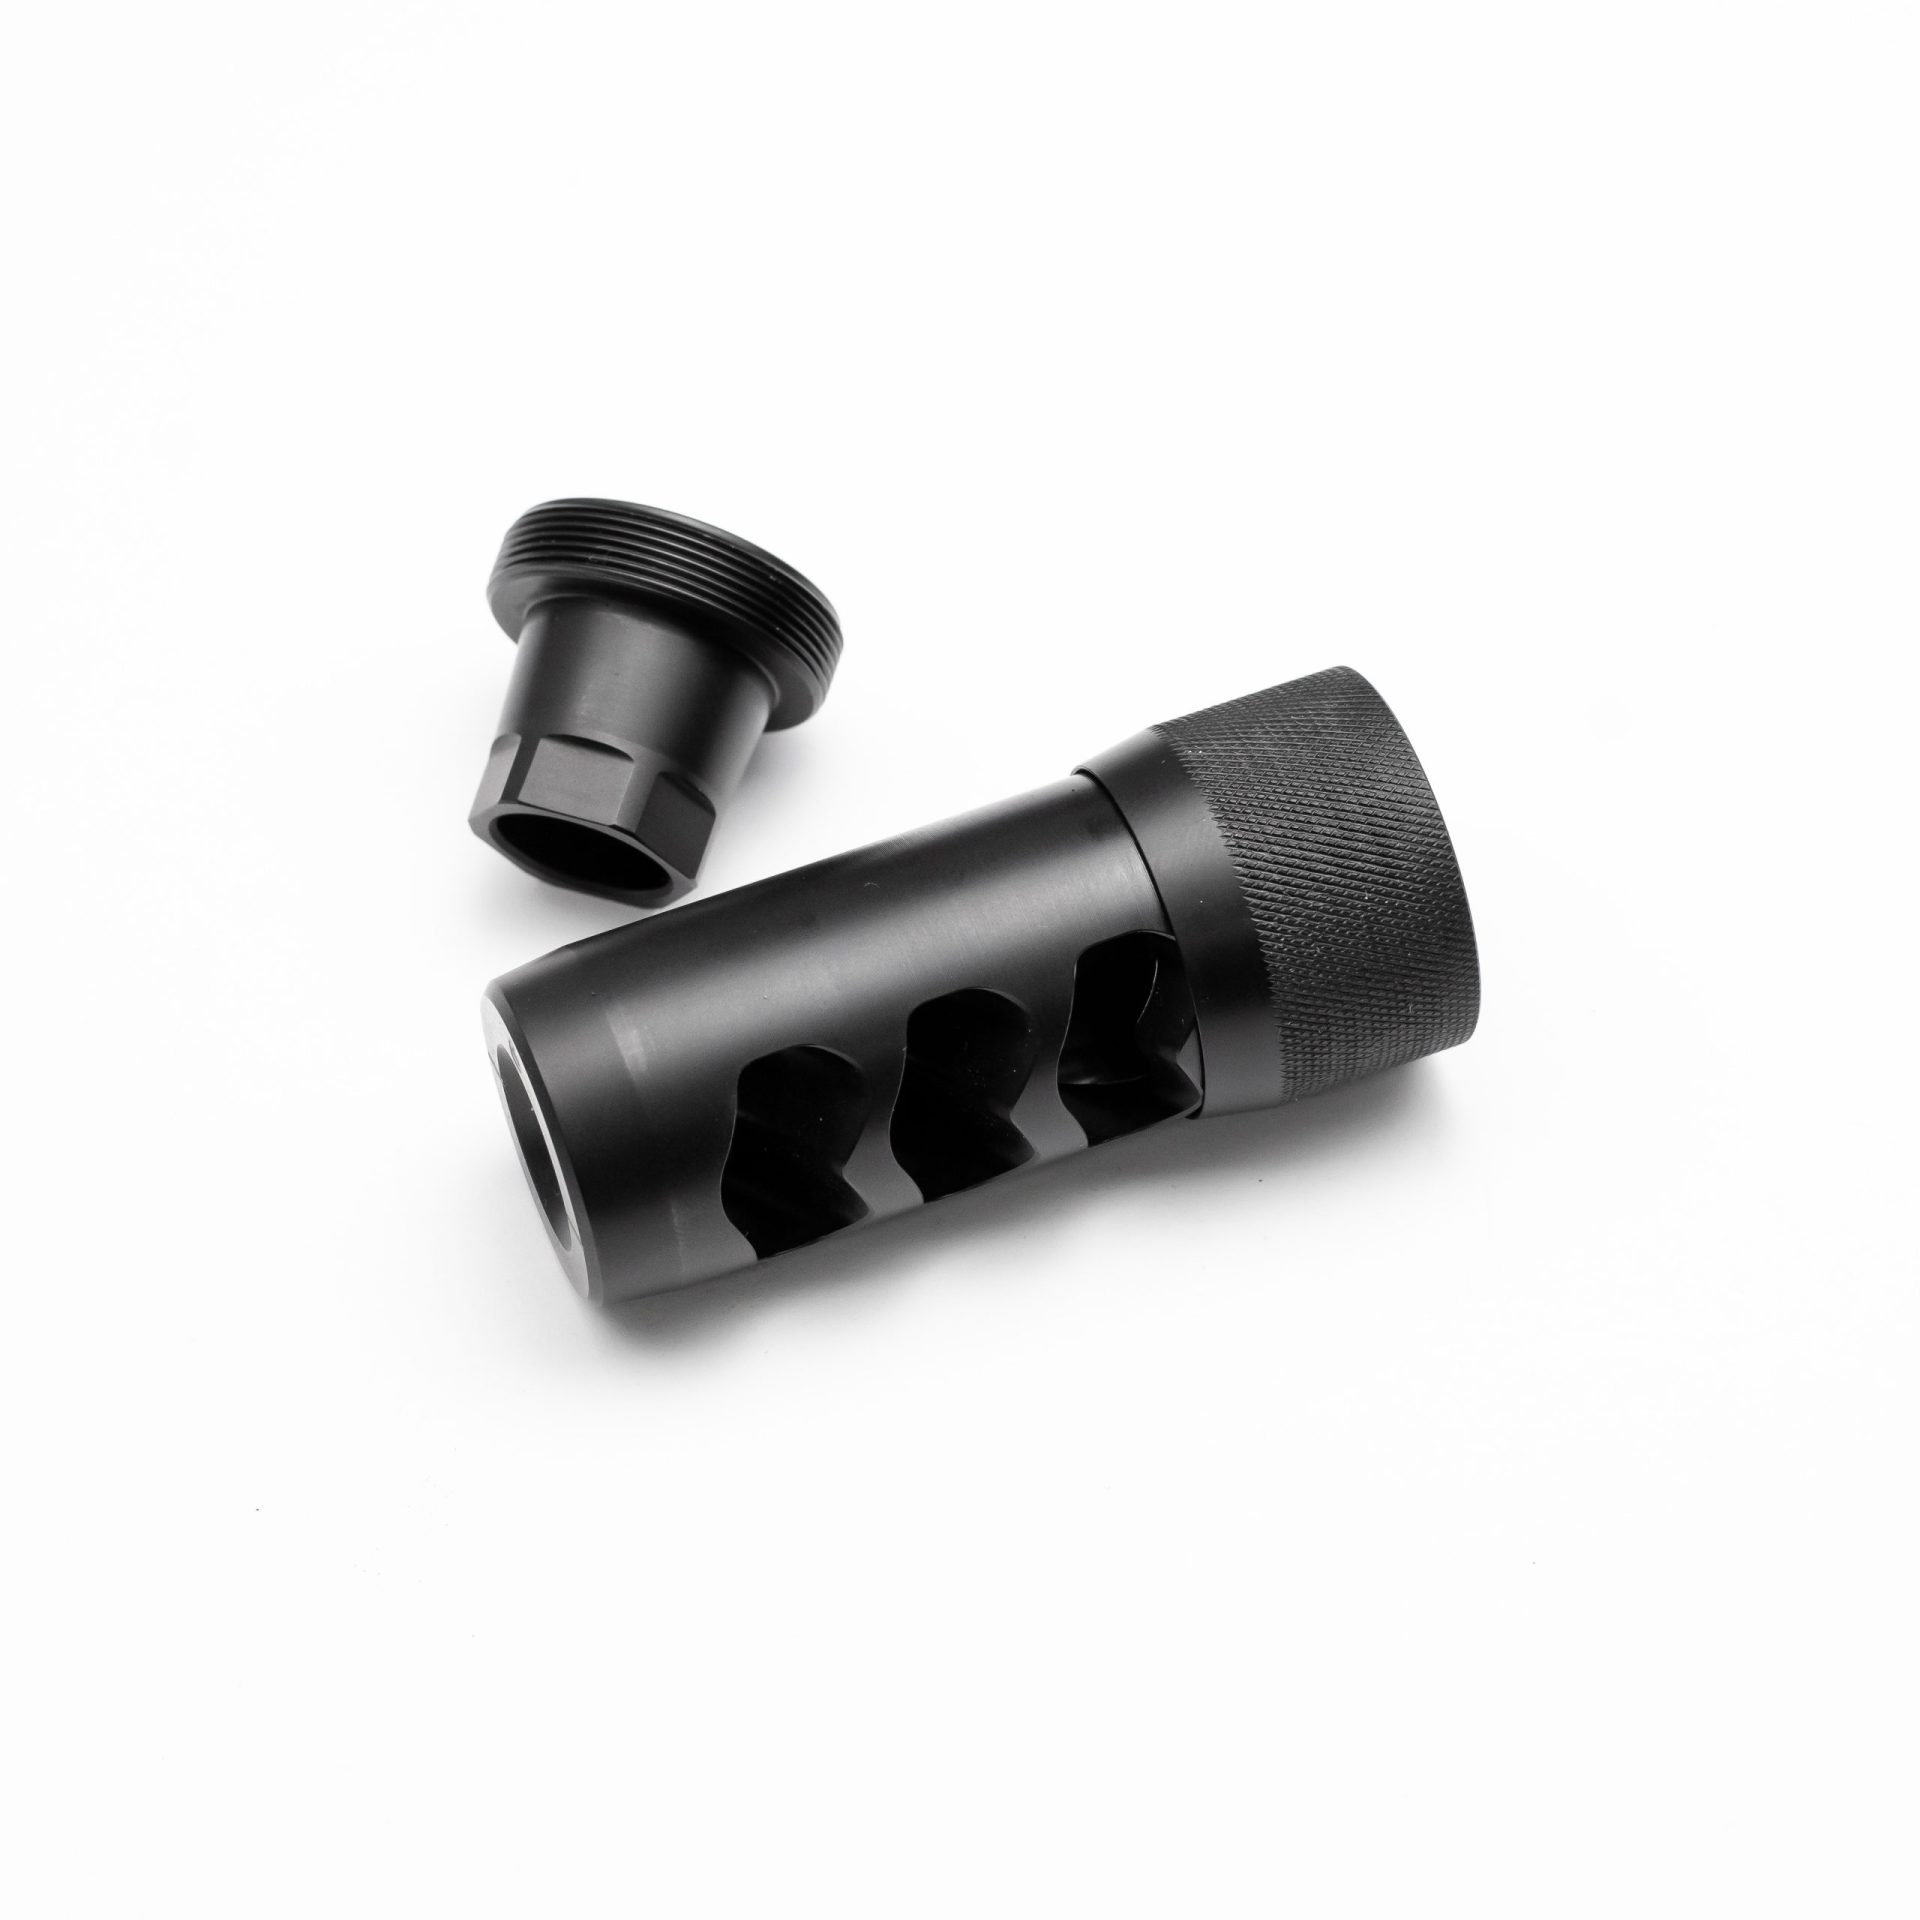 Need help with choosing a muzzle brake I've been looking at MDT